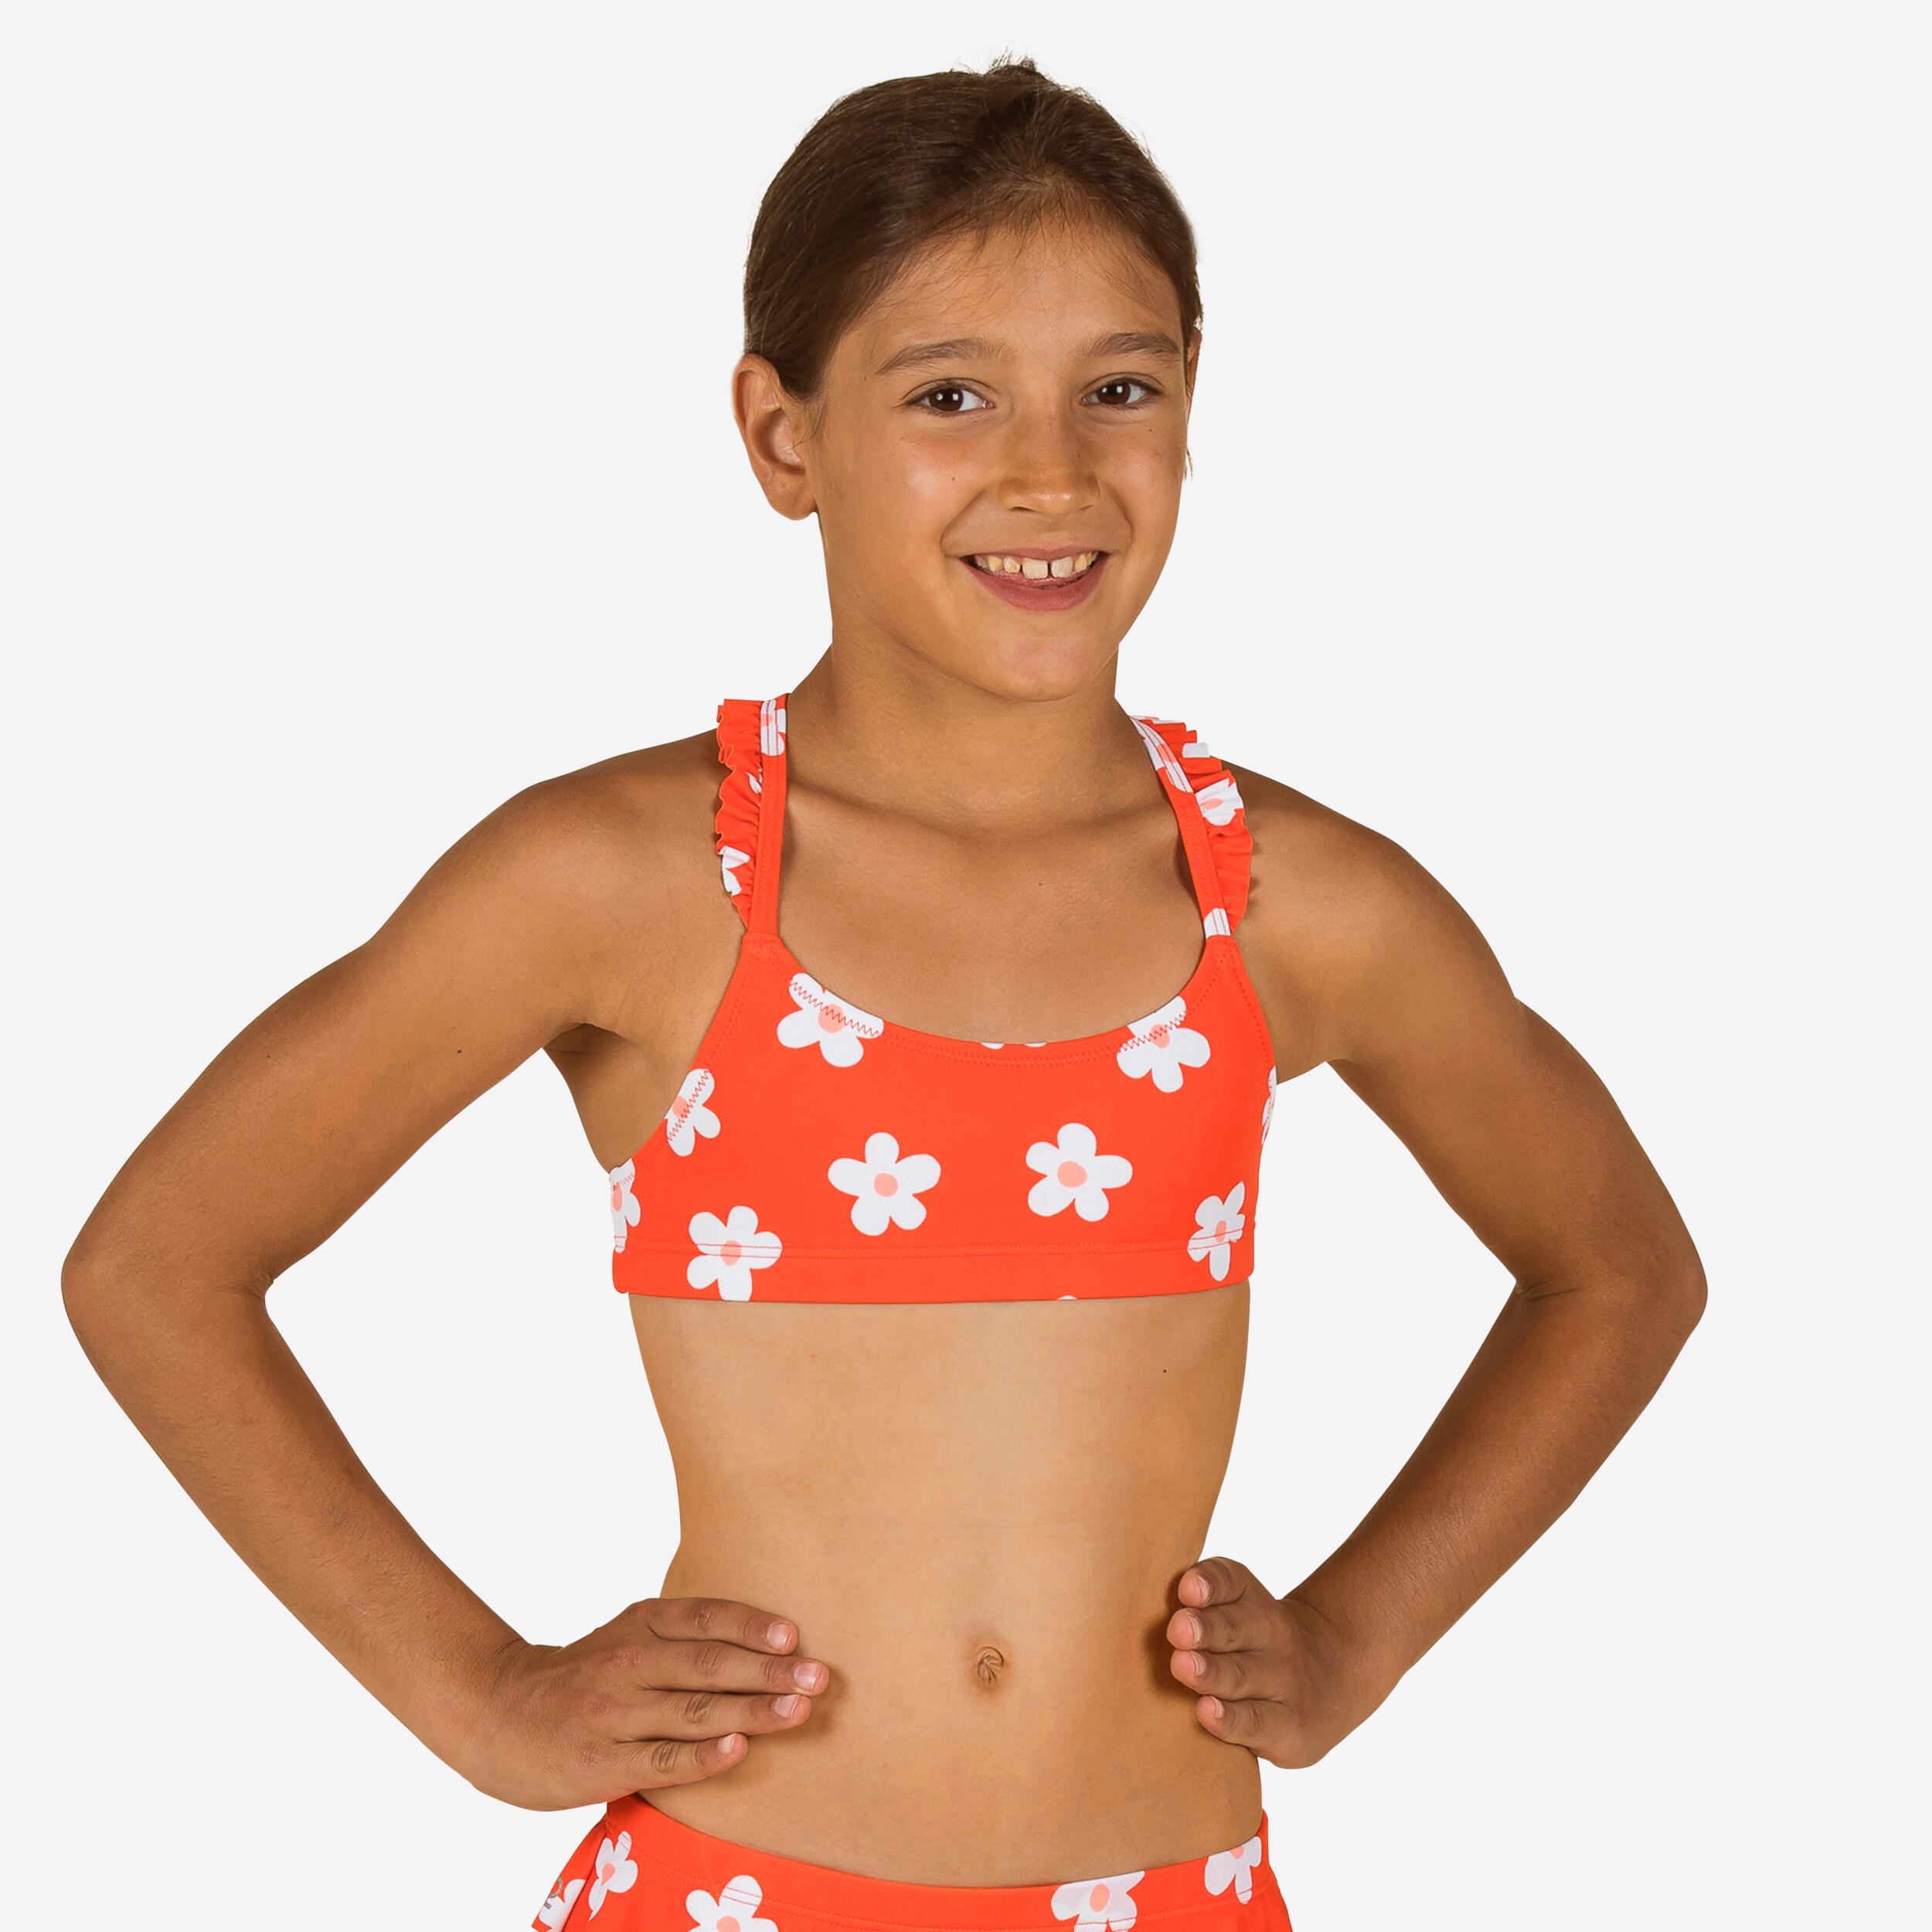 Girl's swimsuit top for two-piece swimsuit Lila Marg red 1/4